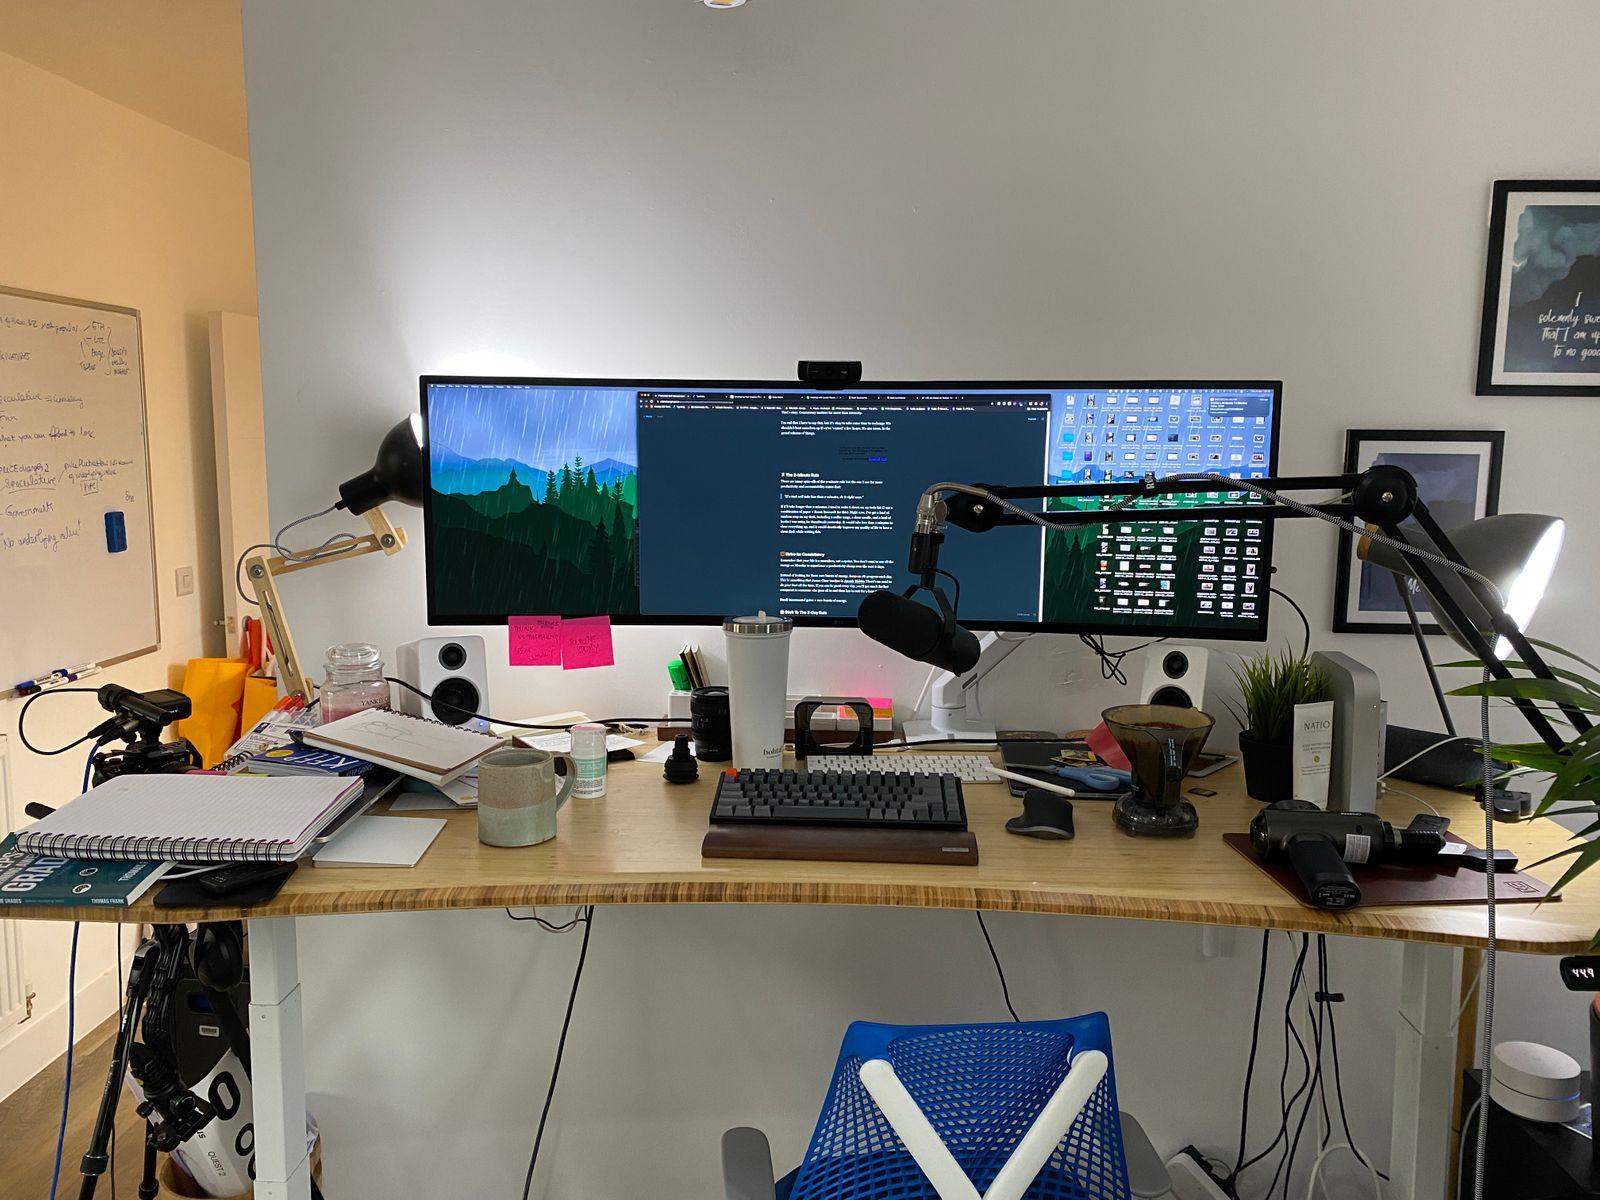 My messy desk before applying the 2-minute rule